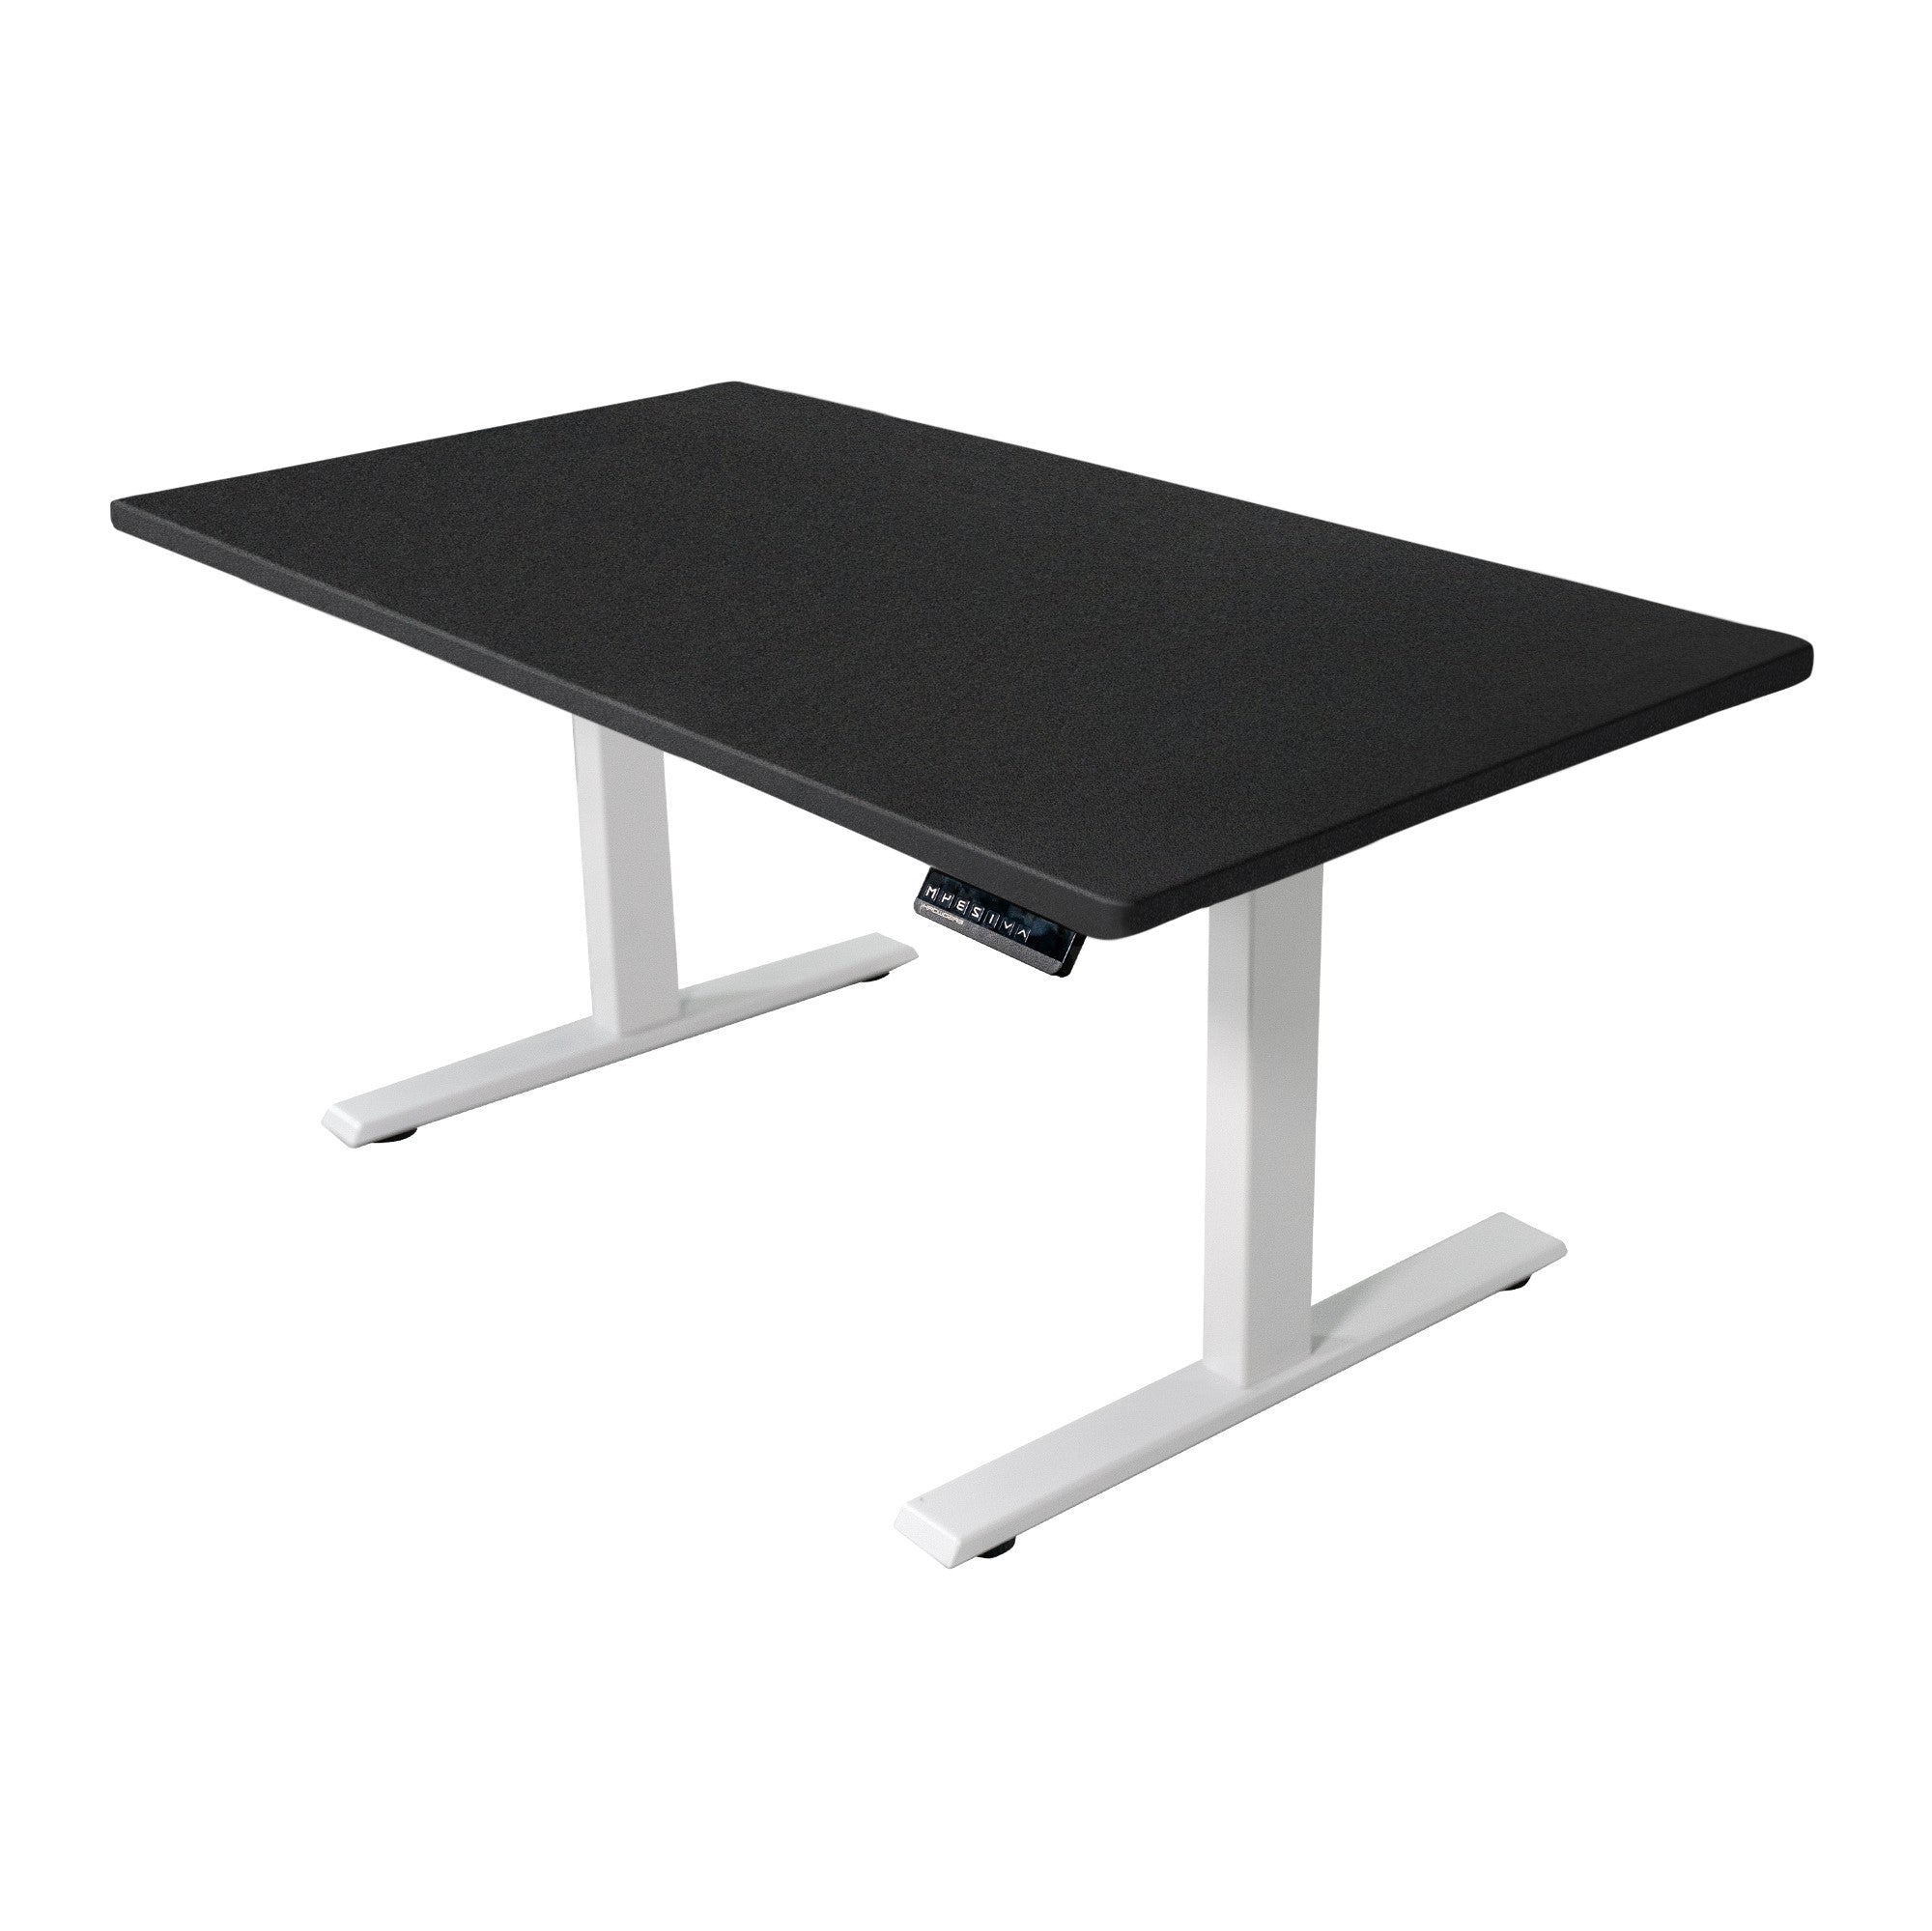 Electric Height Adjustable Desk with Customize Tabletop Dimension